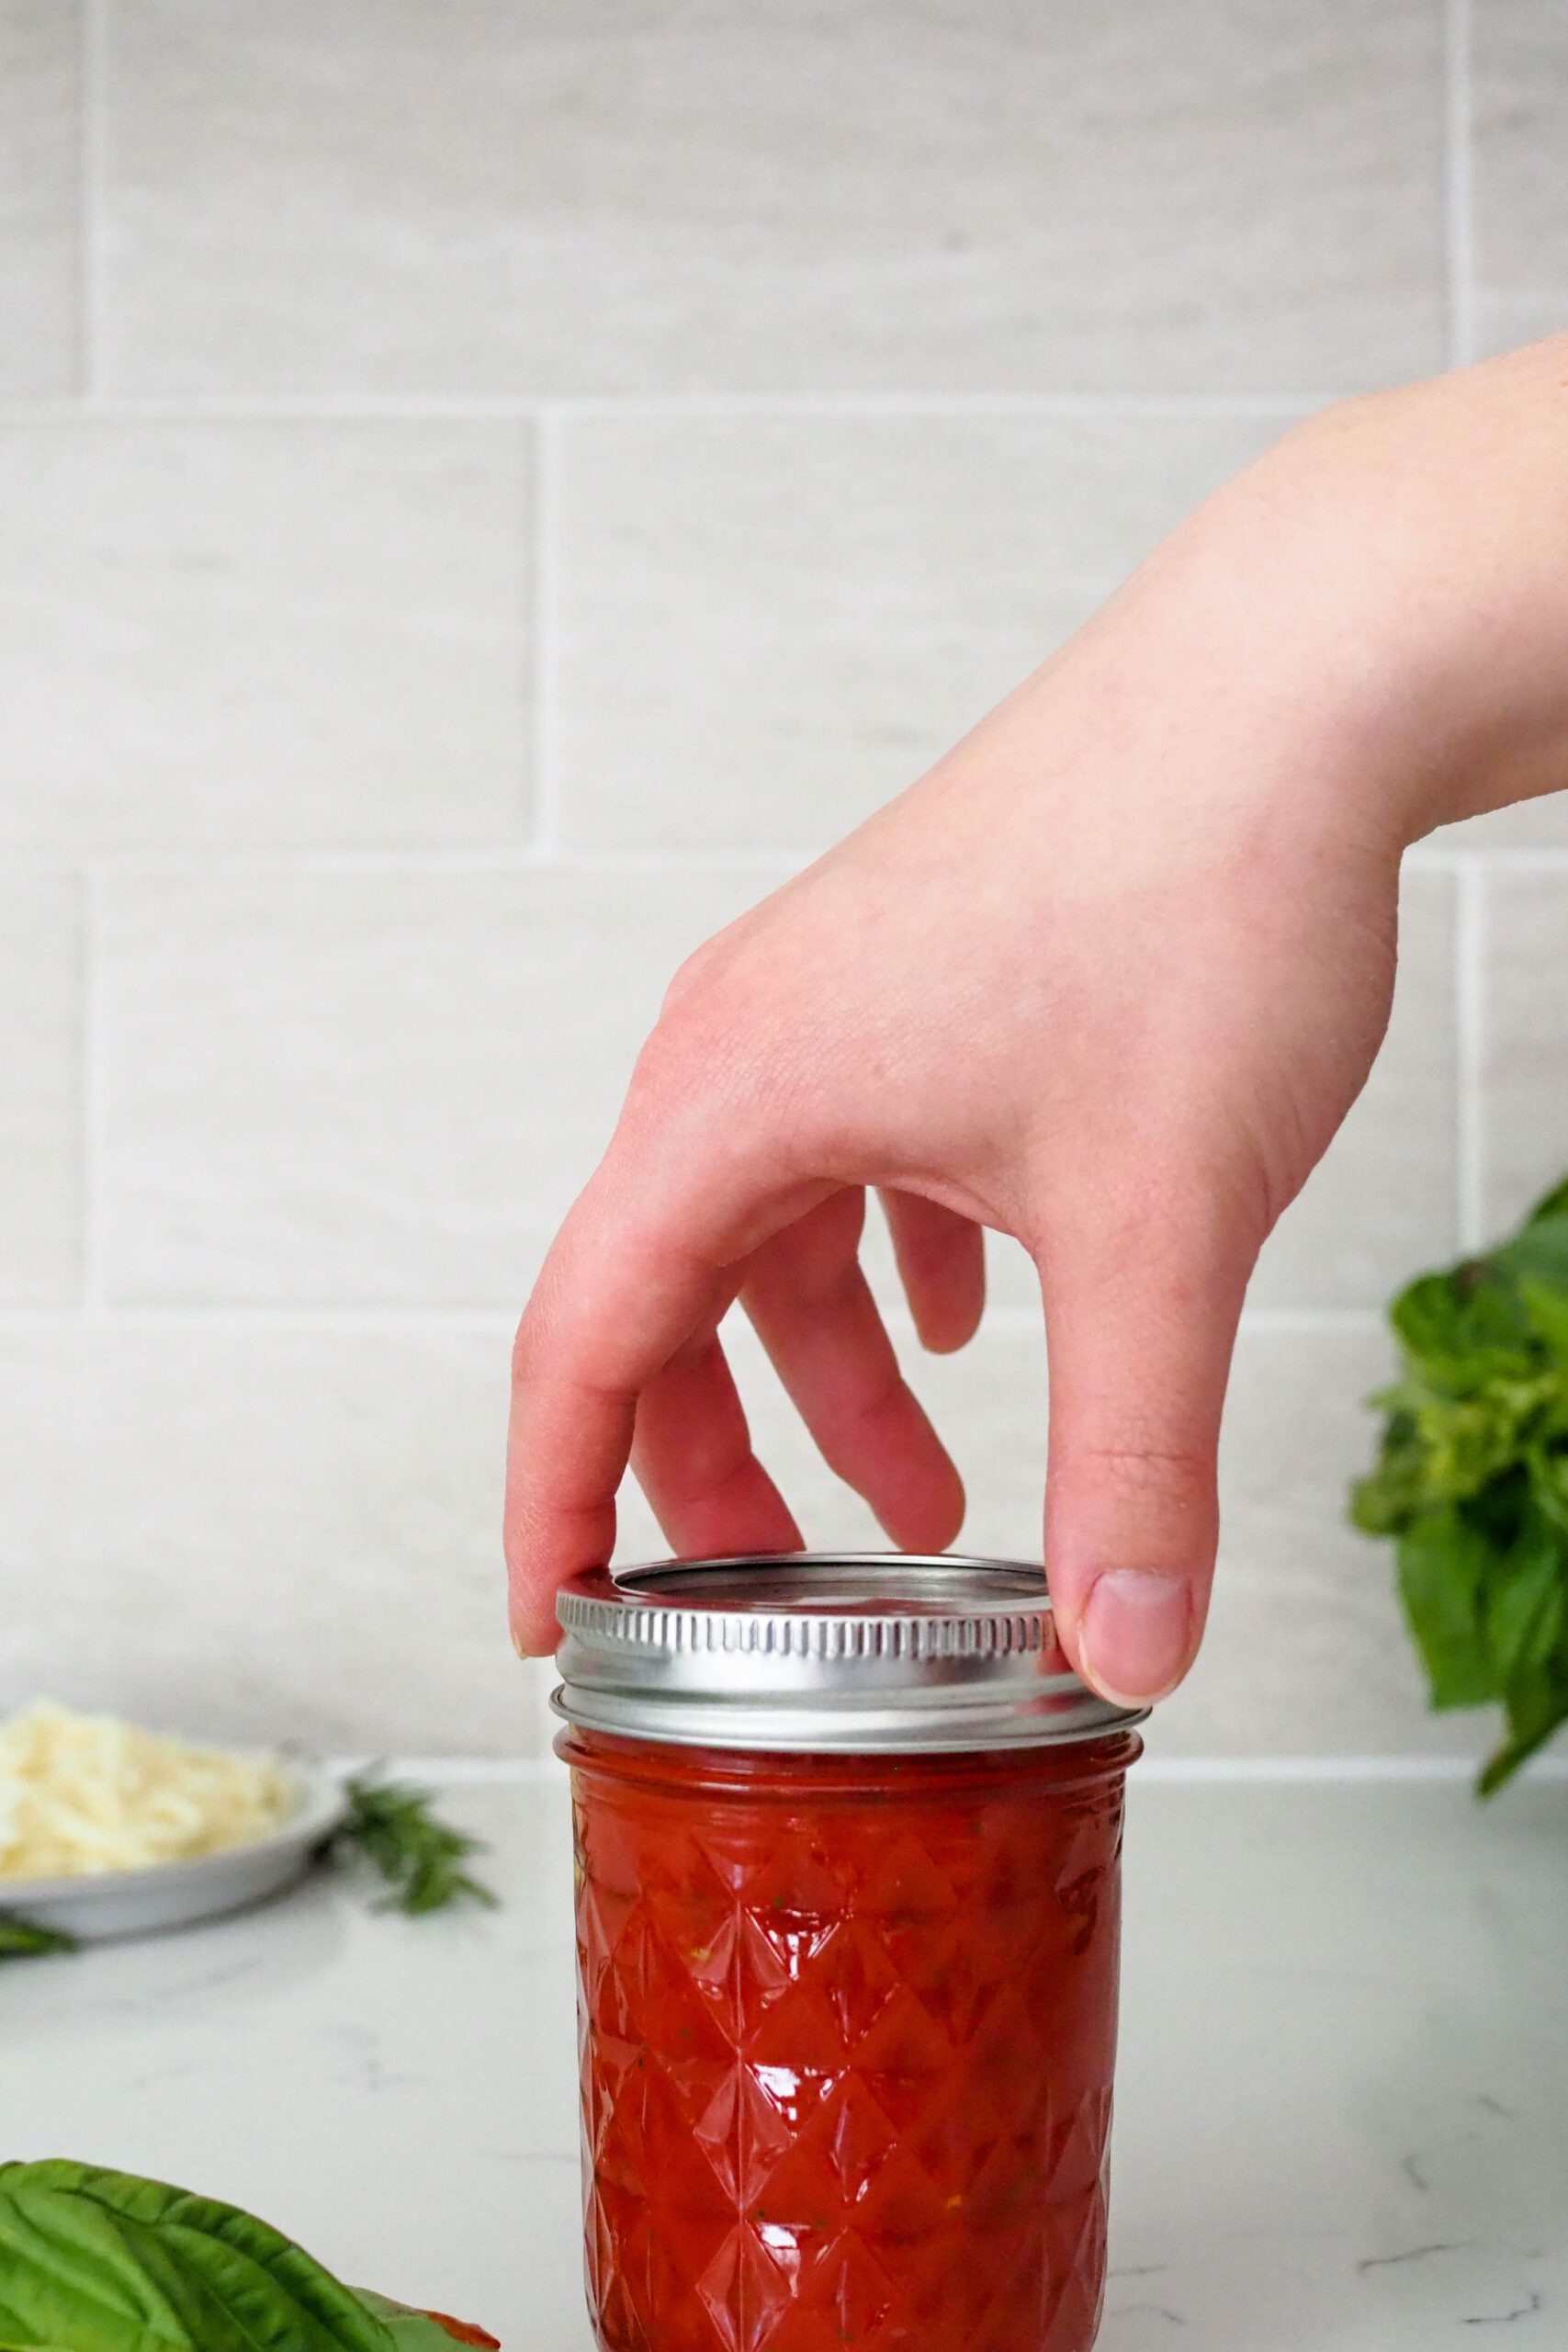 A hand screws on the lid of a jar containing pizza sauce made from tomato paste.